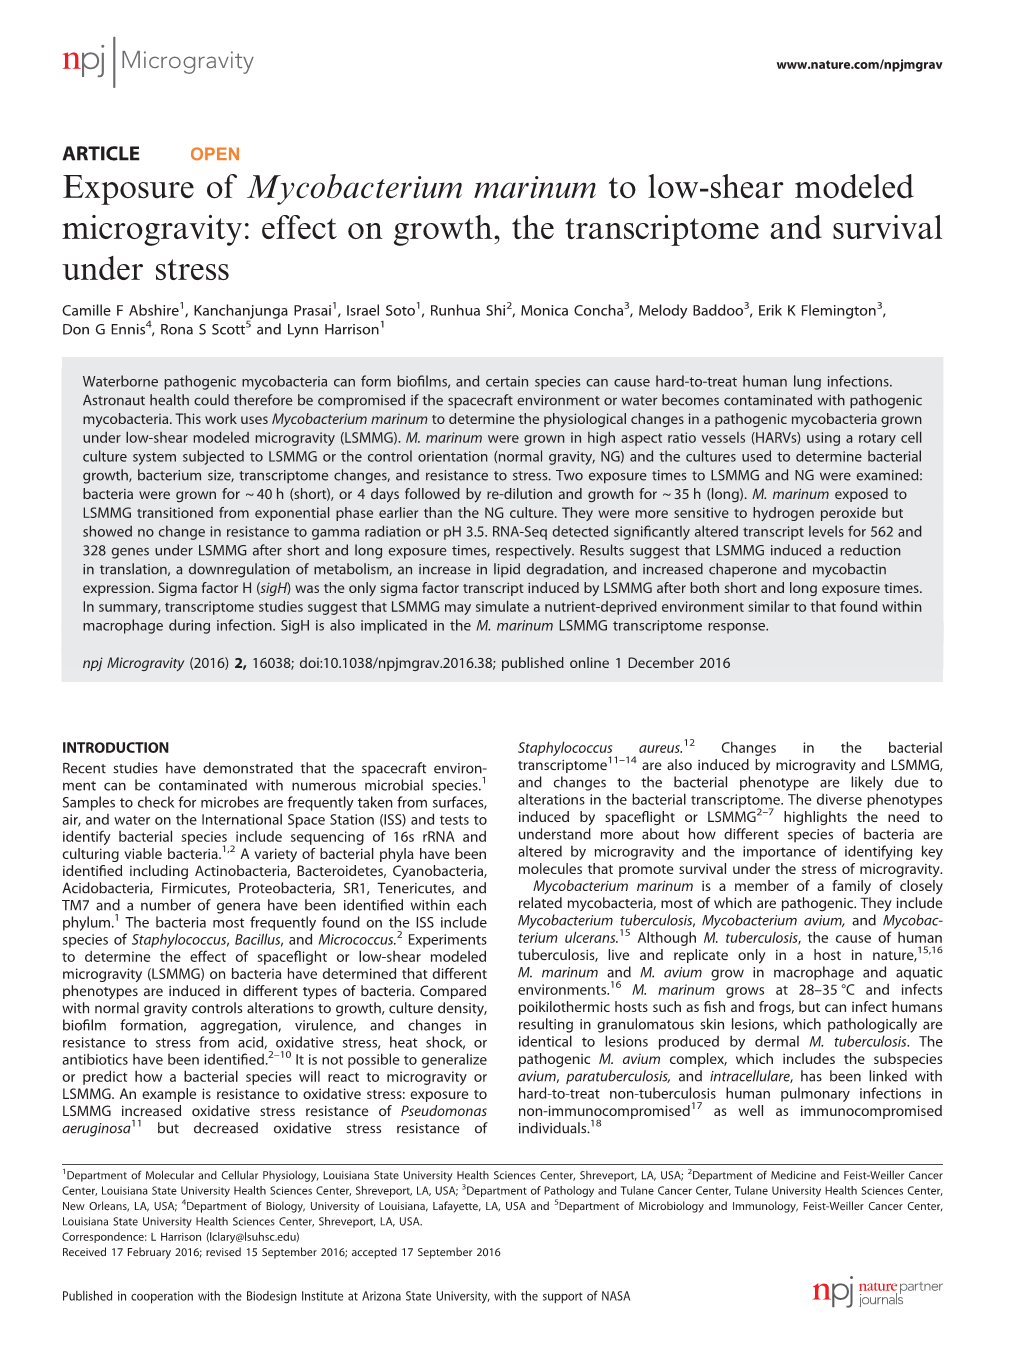 Effect on Growth, the Transcriptome and Survival Under Stress